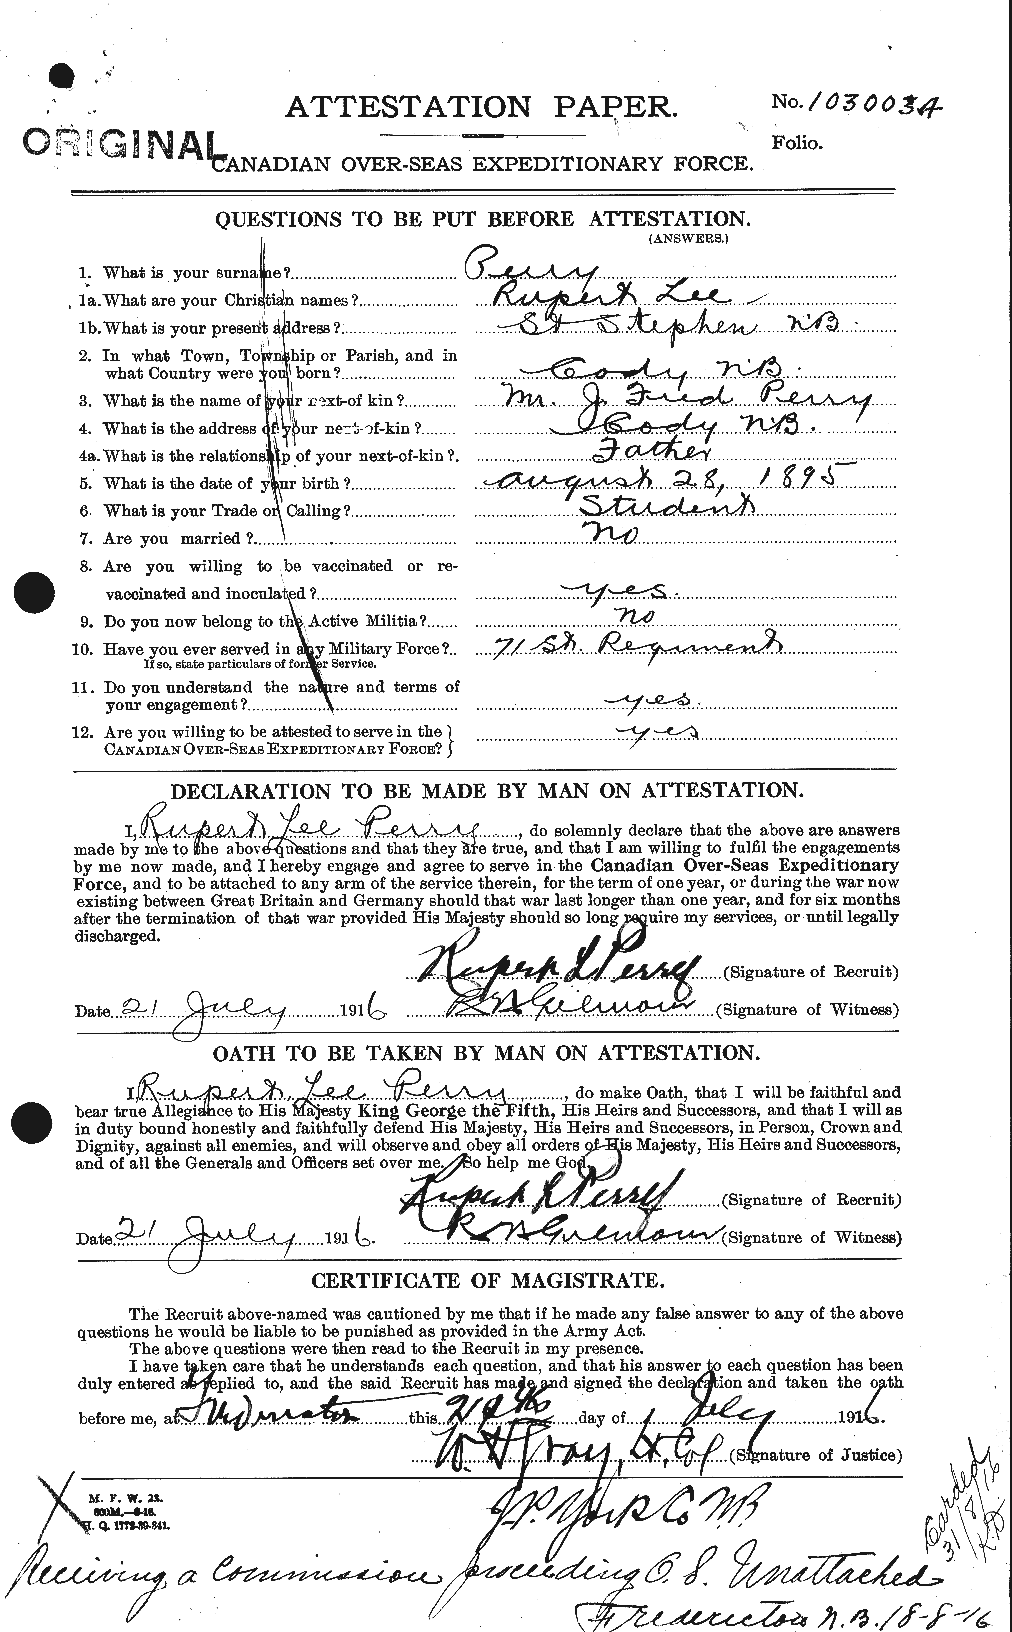 Personnel Records of the First World War - CEF 575040a